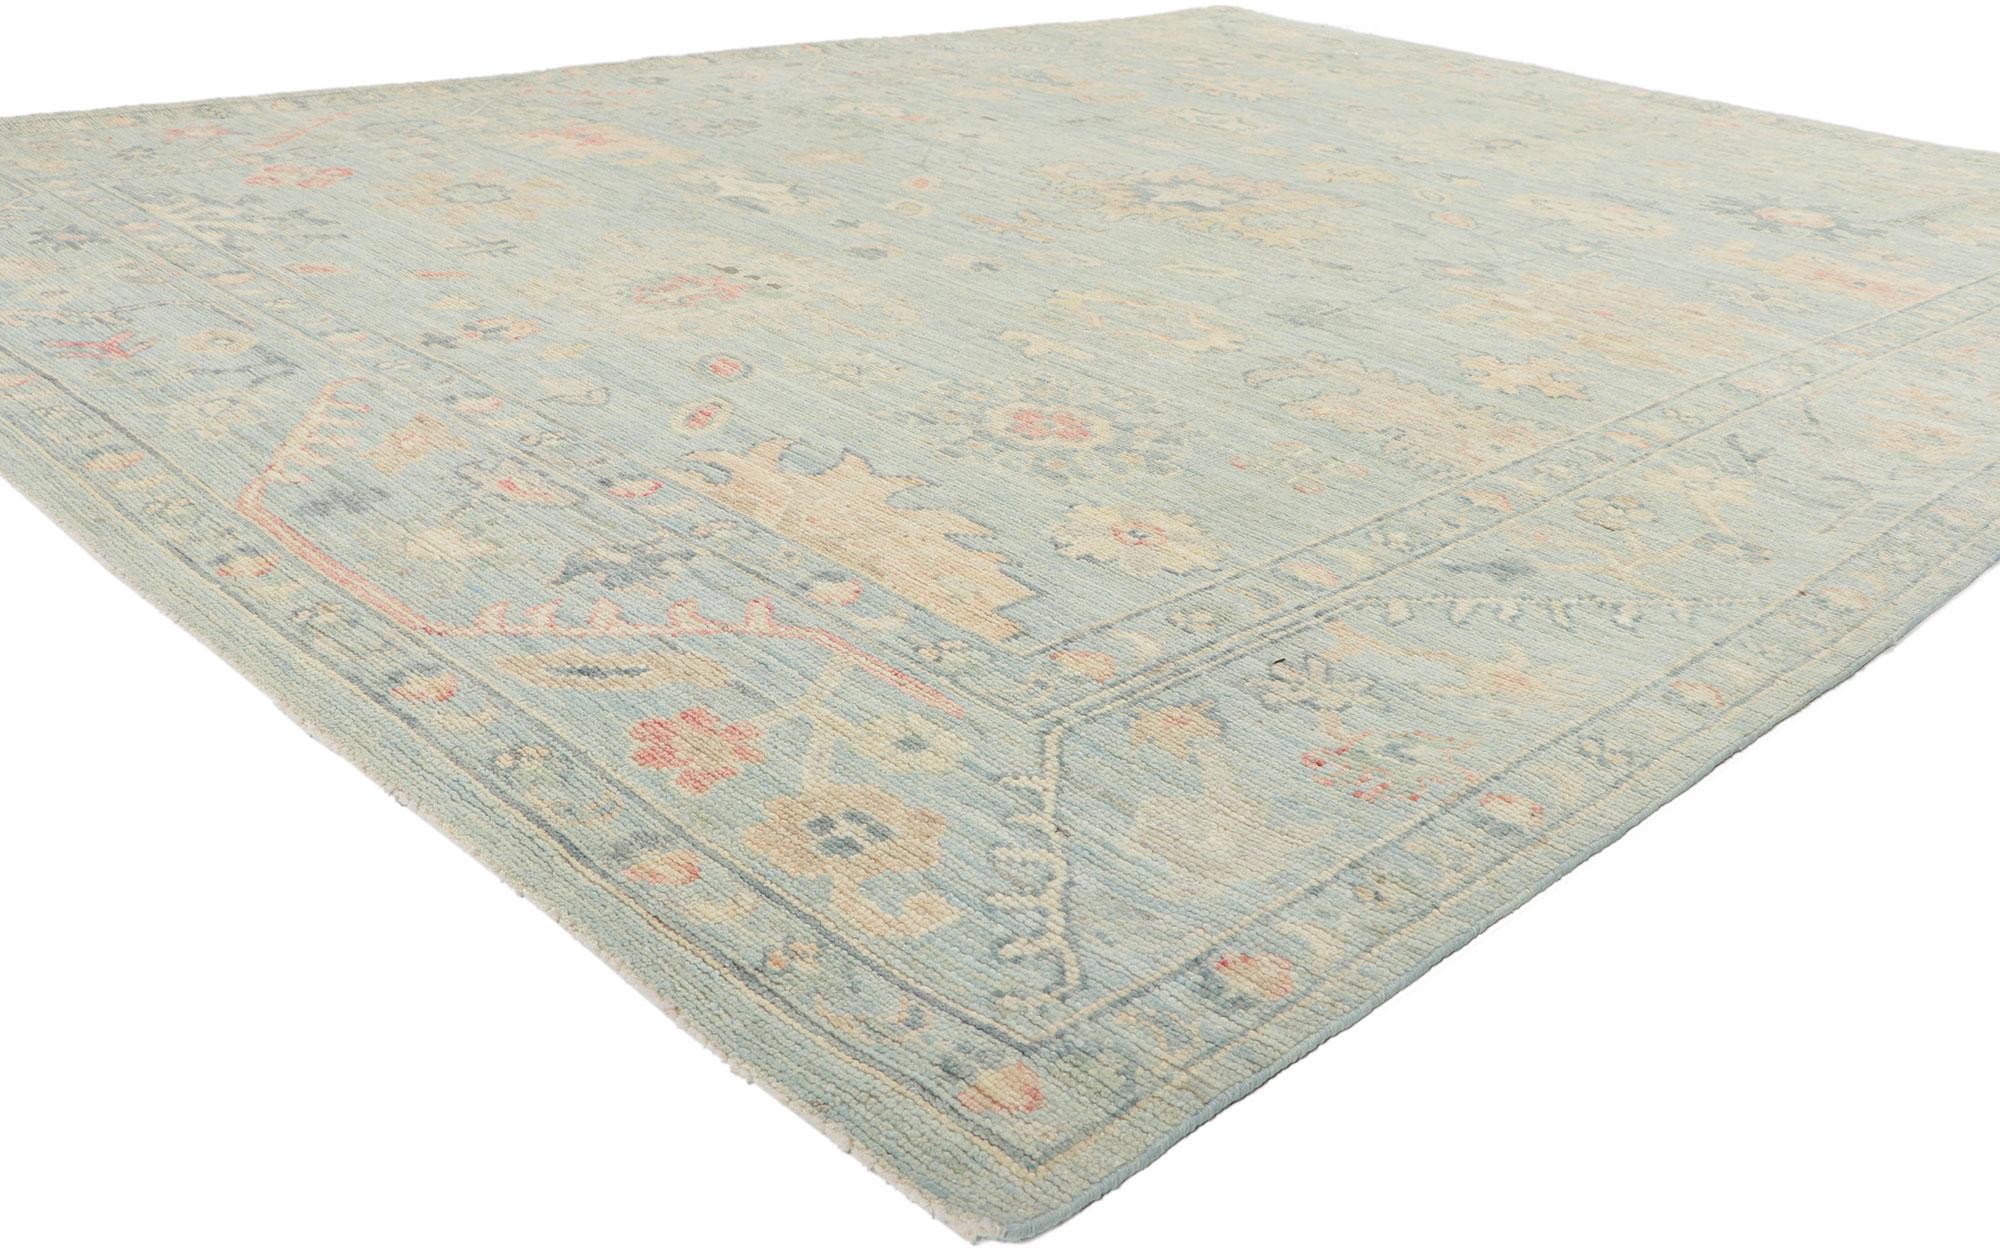 80895 Colorful Pastel Oushak Rug with Modern Style, 07'09 x 09'09. 
Indulgently crafted and steeped in the refined opulence of Regencycore with a modern twist, this hand-knotted wool pastel Oushak rug unfolds as a masterpiece of modern